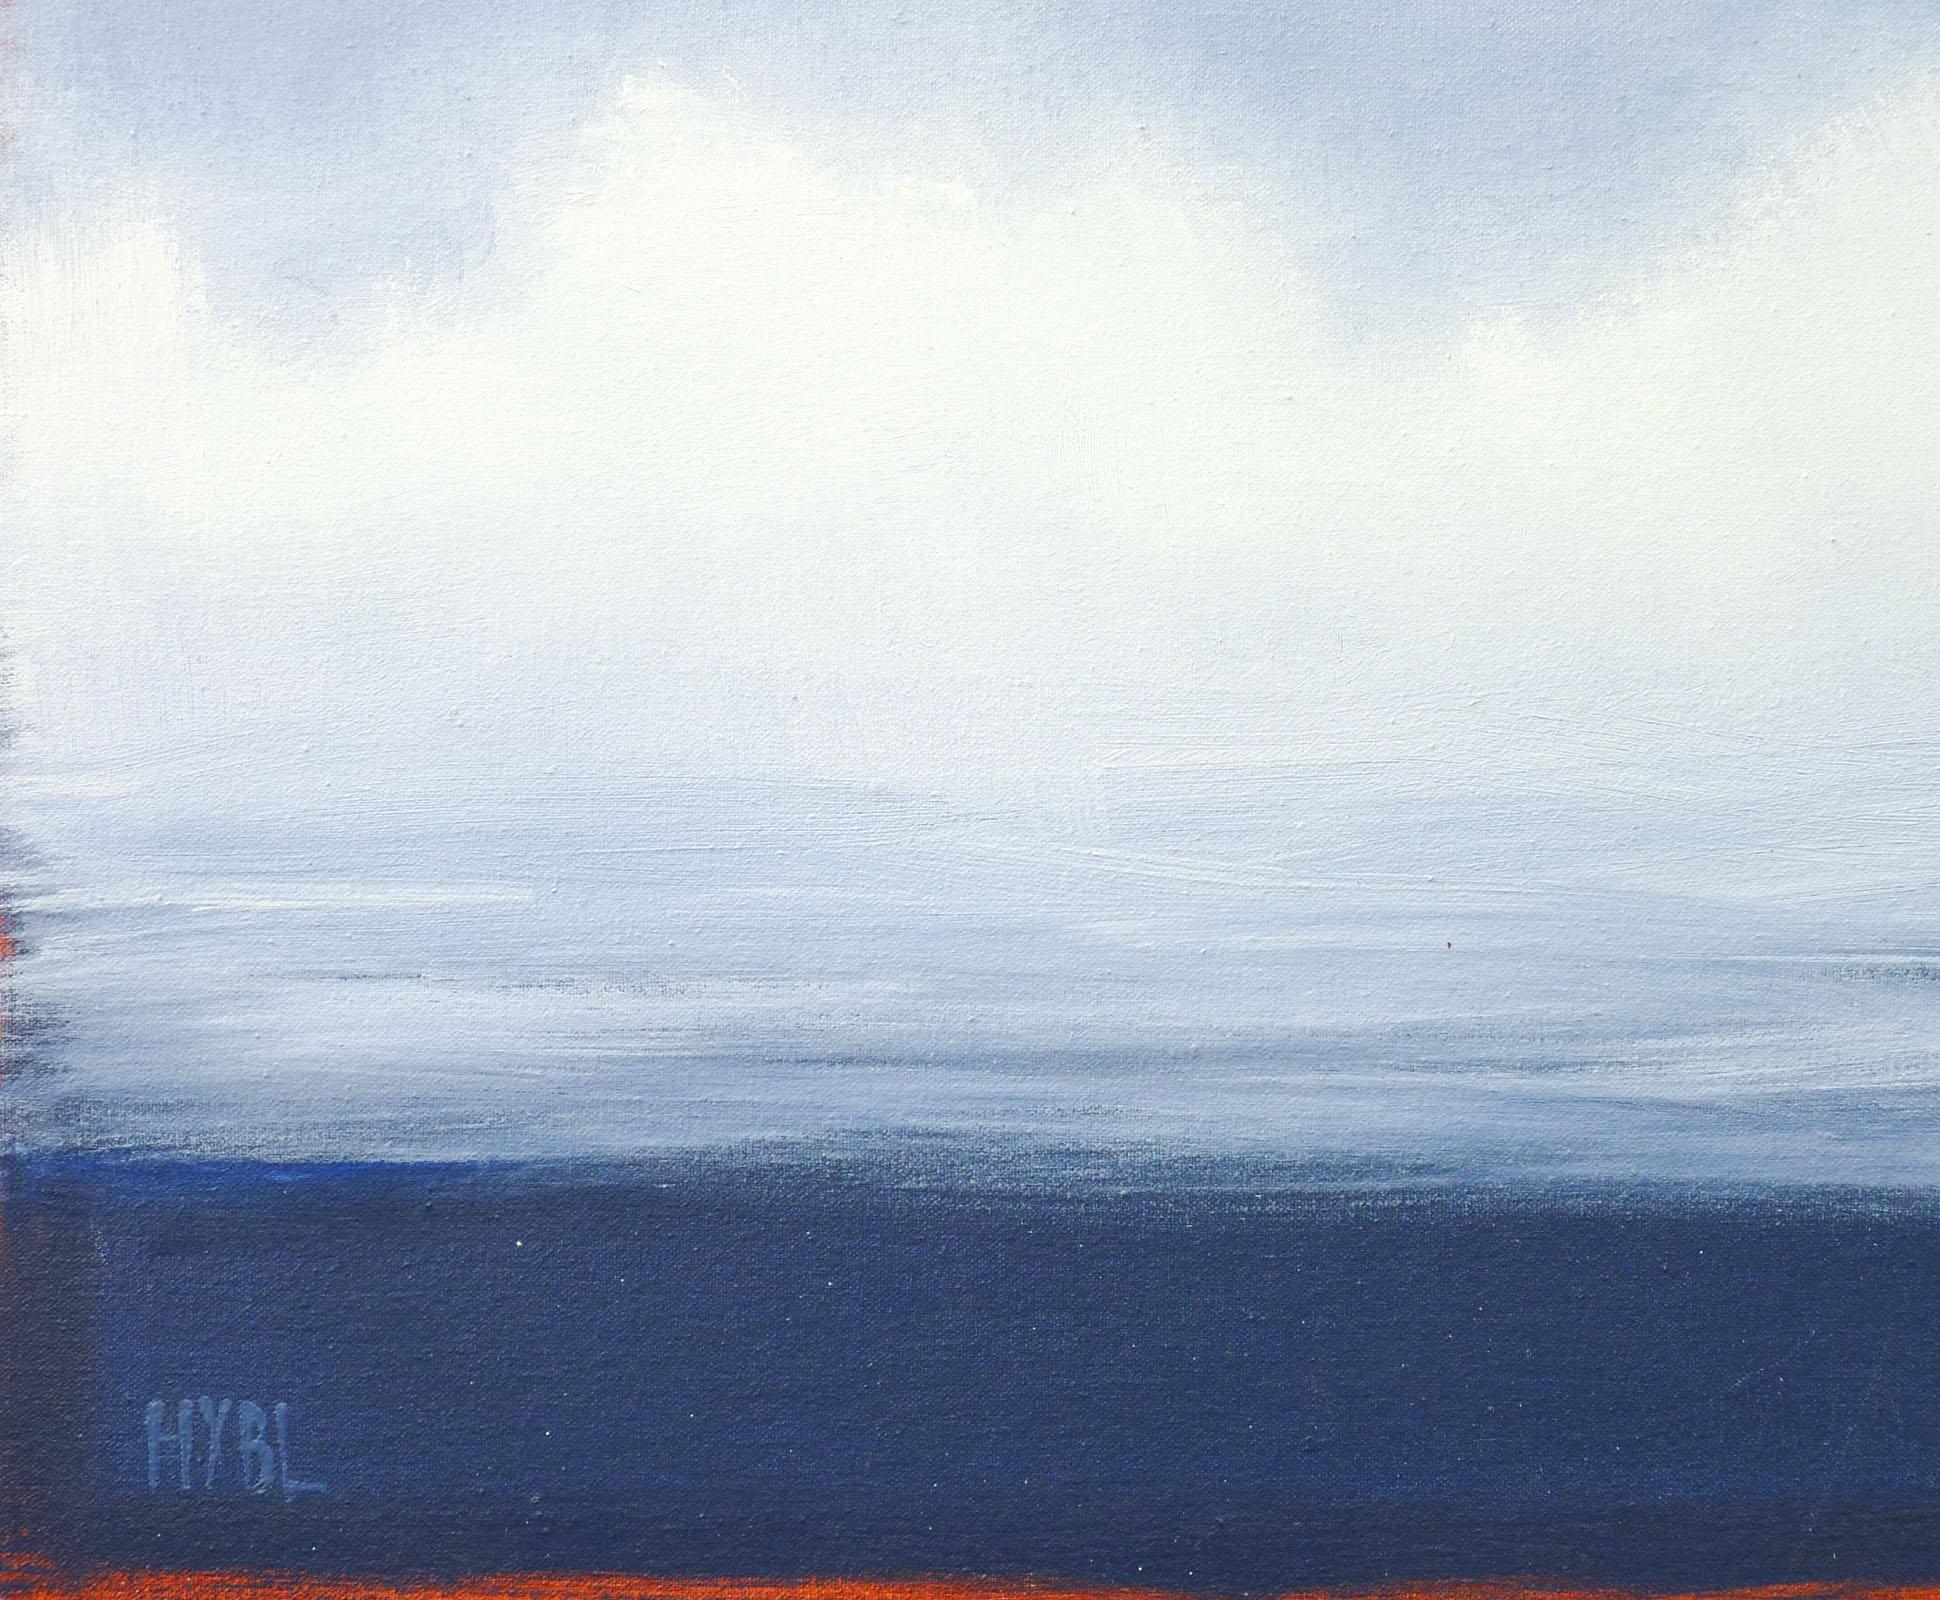 <p>Artist Comments<br>Getting to see the Pacific Ocean on a daily basis, artist Heidi Hybl sometimes witnesses clouds that appear to dance along the horizon. In this monochromatic abstract, Heidi captures exactly that experience. 